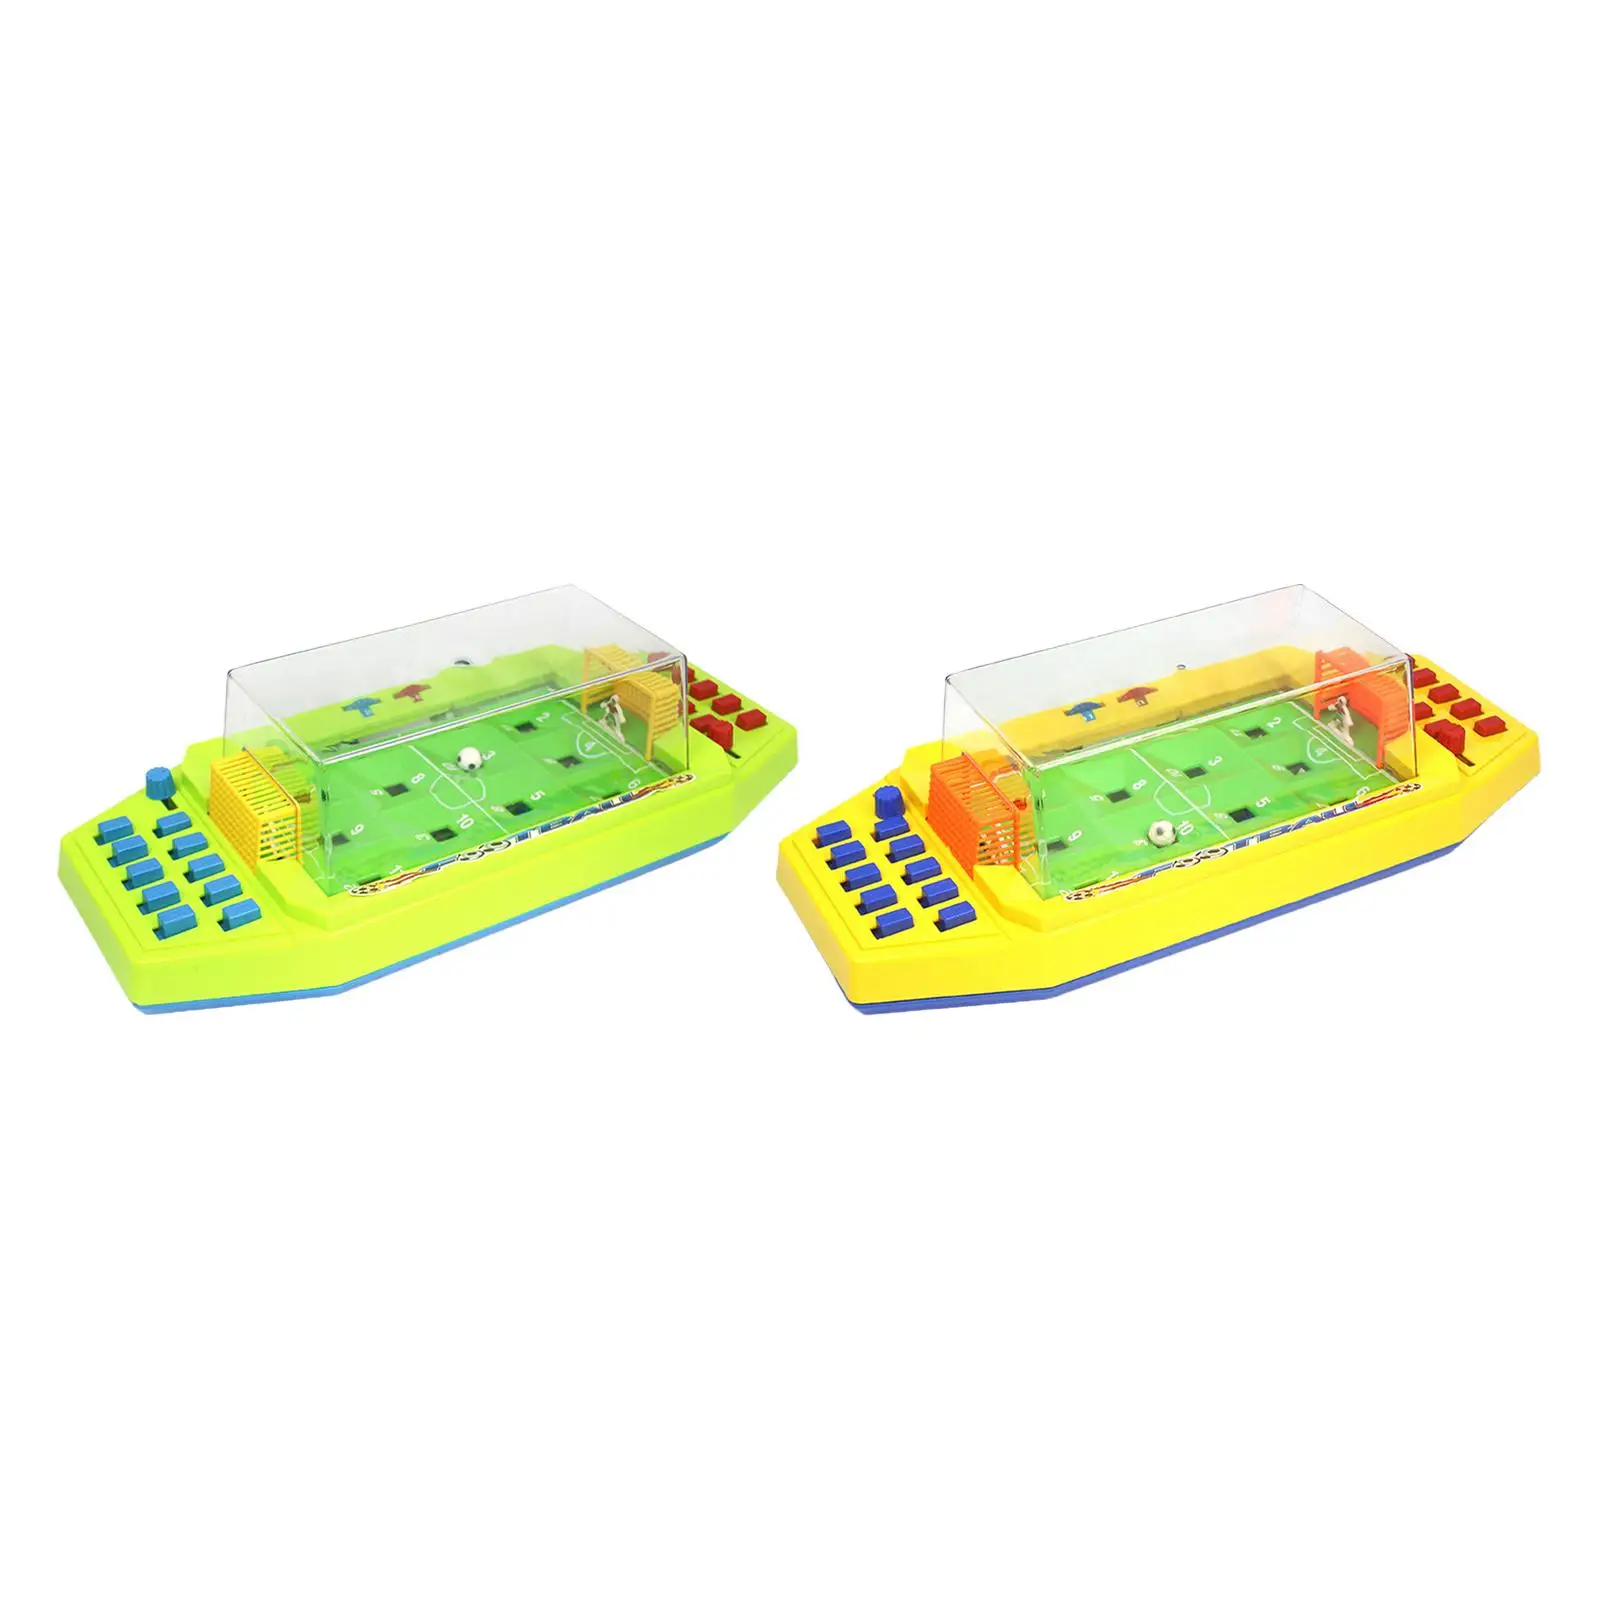 Soccer Tabletop Game with Scoreboard Interactive Table Soccer Game Two Players Kids Adults Parties Family Night Birthday Gift